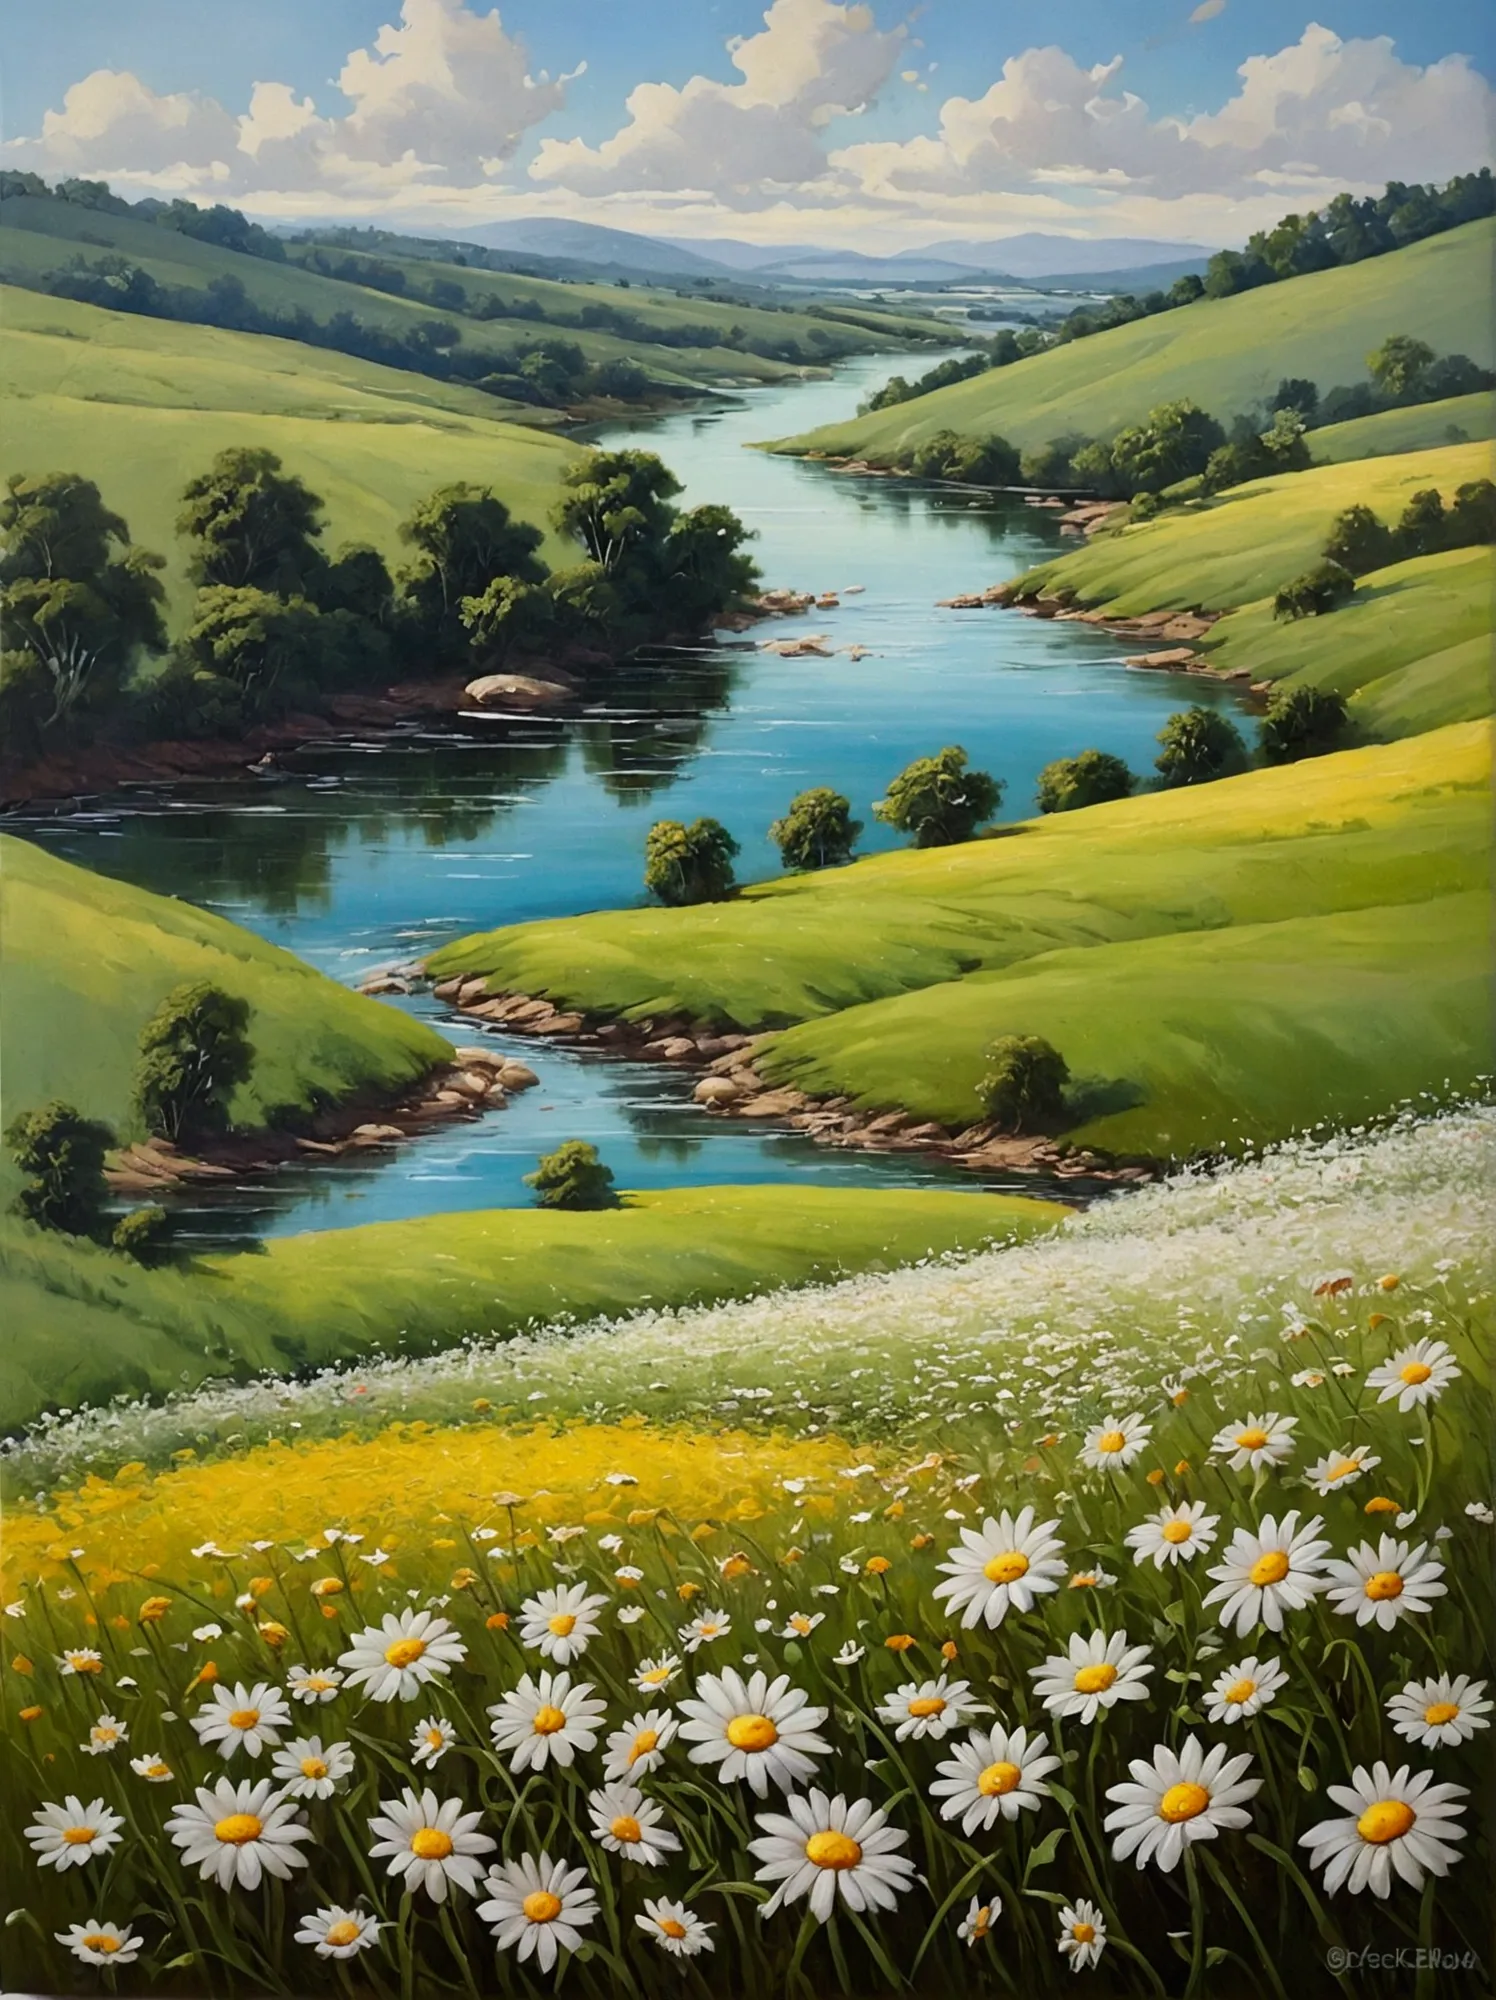 Painting of a field of daisies and a river in the distance, meadowกับดอกไม้, meadow on hills, flower field, โดย Eugene Tertychnyi, [ oil painting ]!!, landscape oil painting, By Franciszek Starowiecki, Summer landscape, meadowฤดูร้อน, By Sylvester Chadrin,...